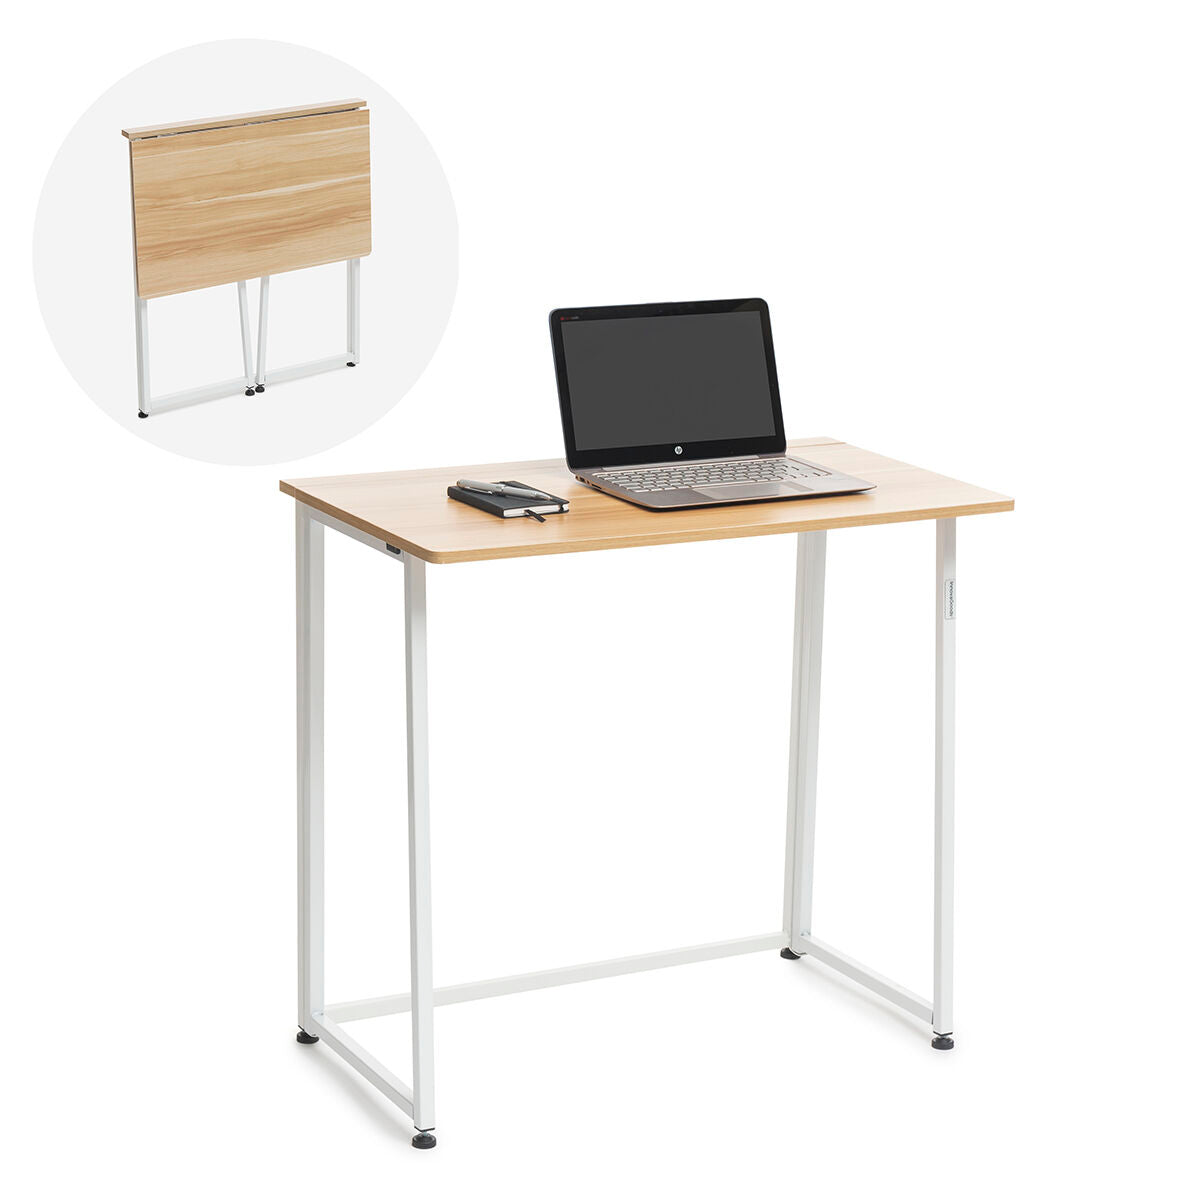 Folding Desk in Wood and White Structure